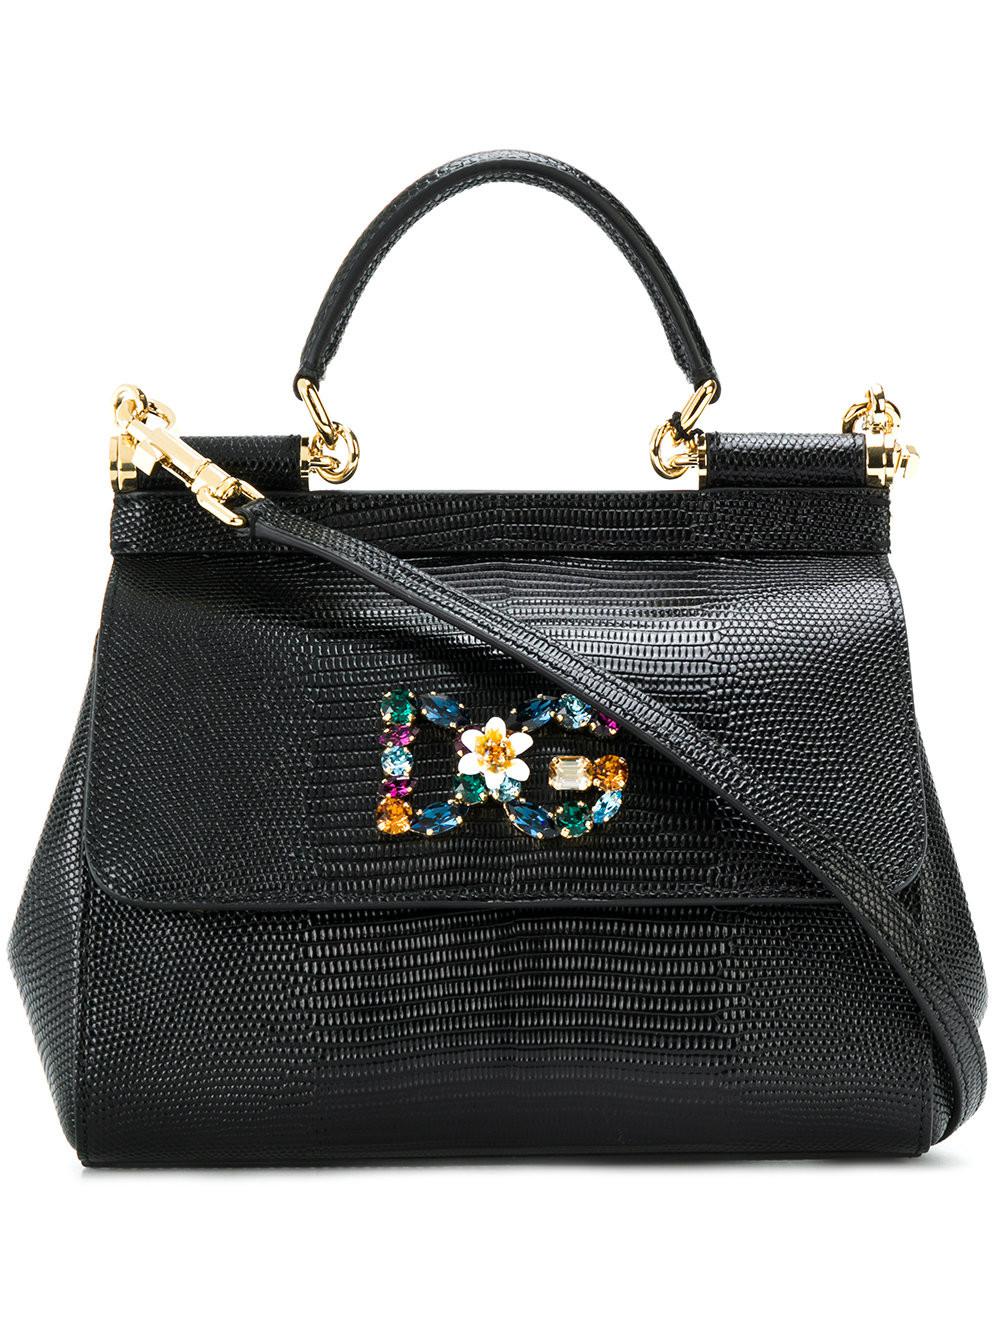 Dolce & Gabbana Small Sicily Top-handle Bag in Black | Lyst